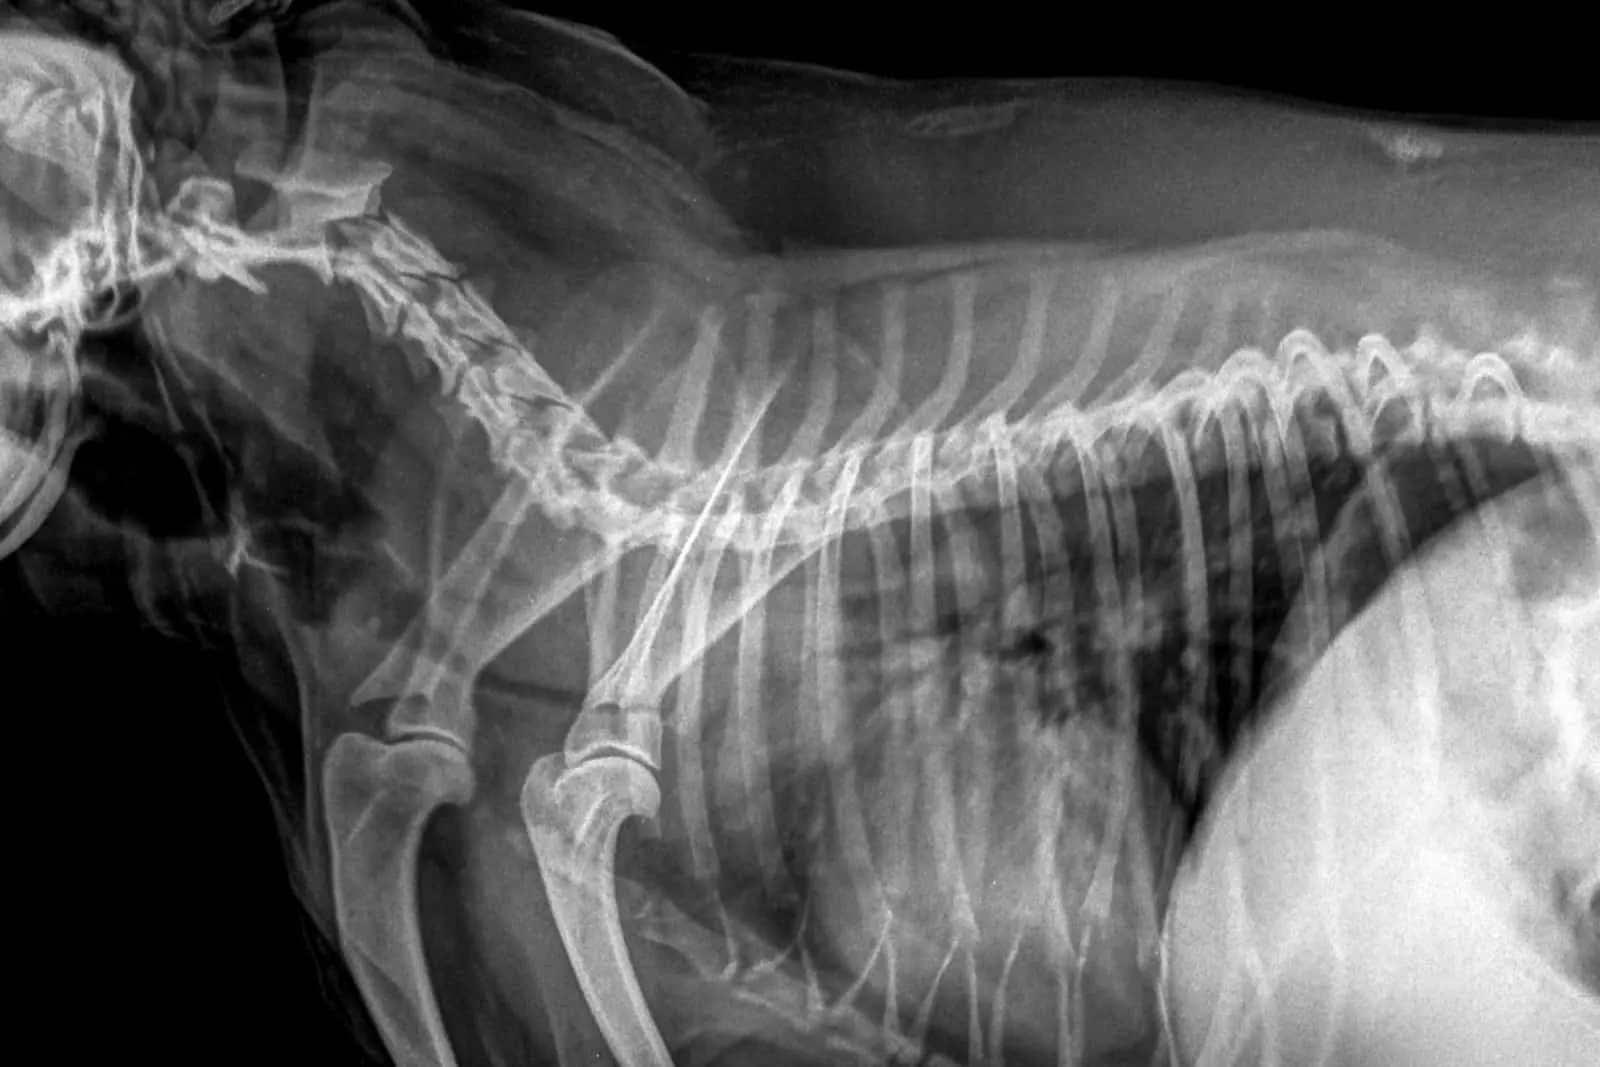 tracheal collapse on x-ray